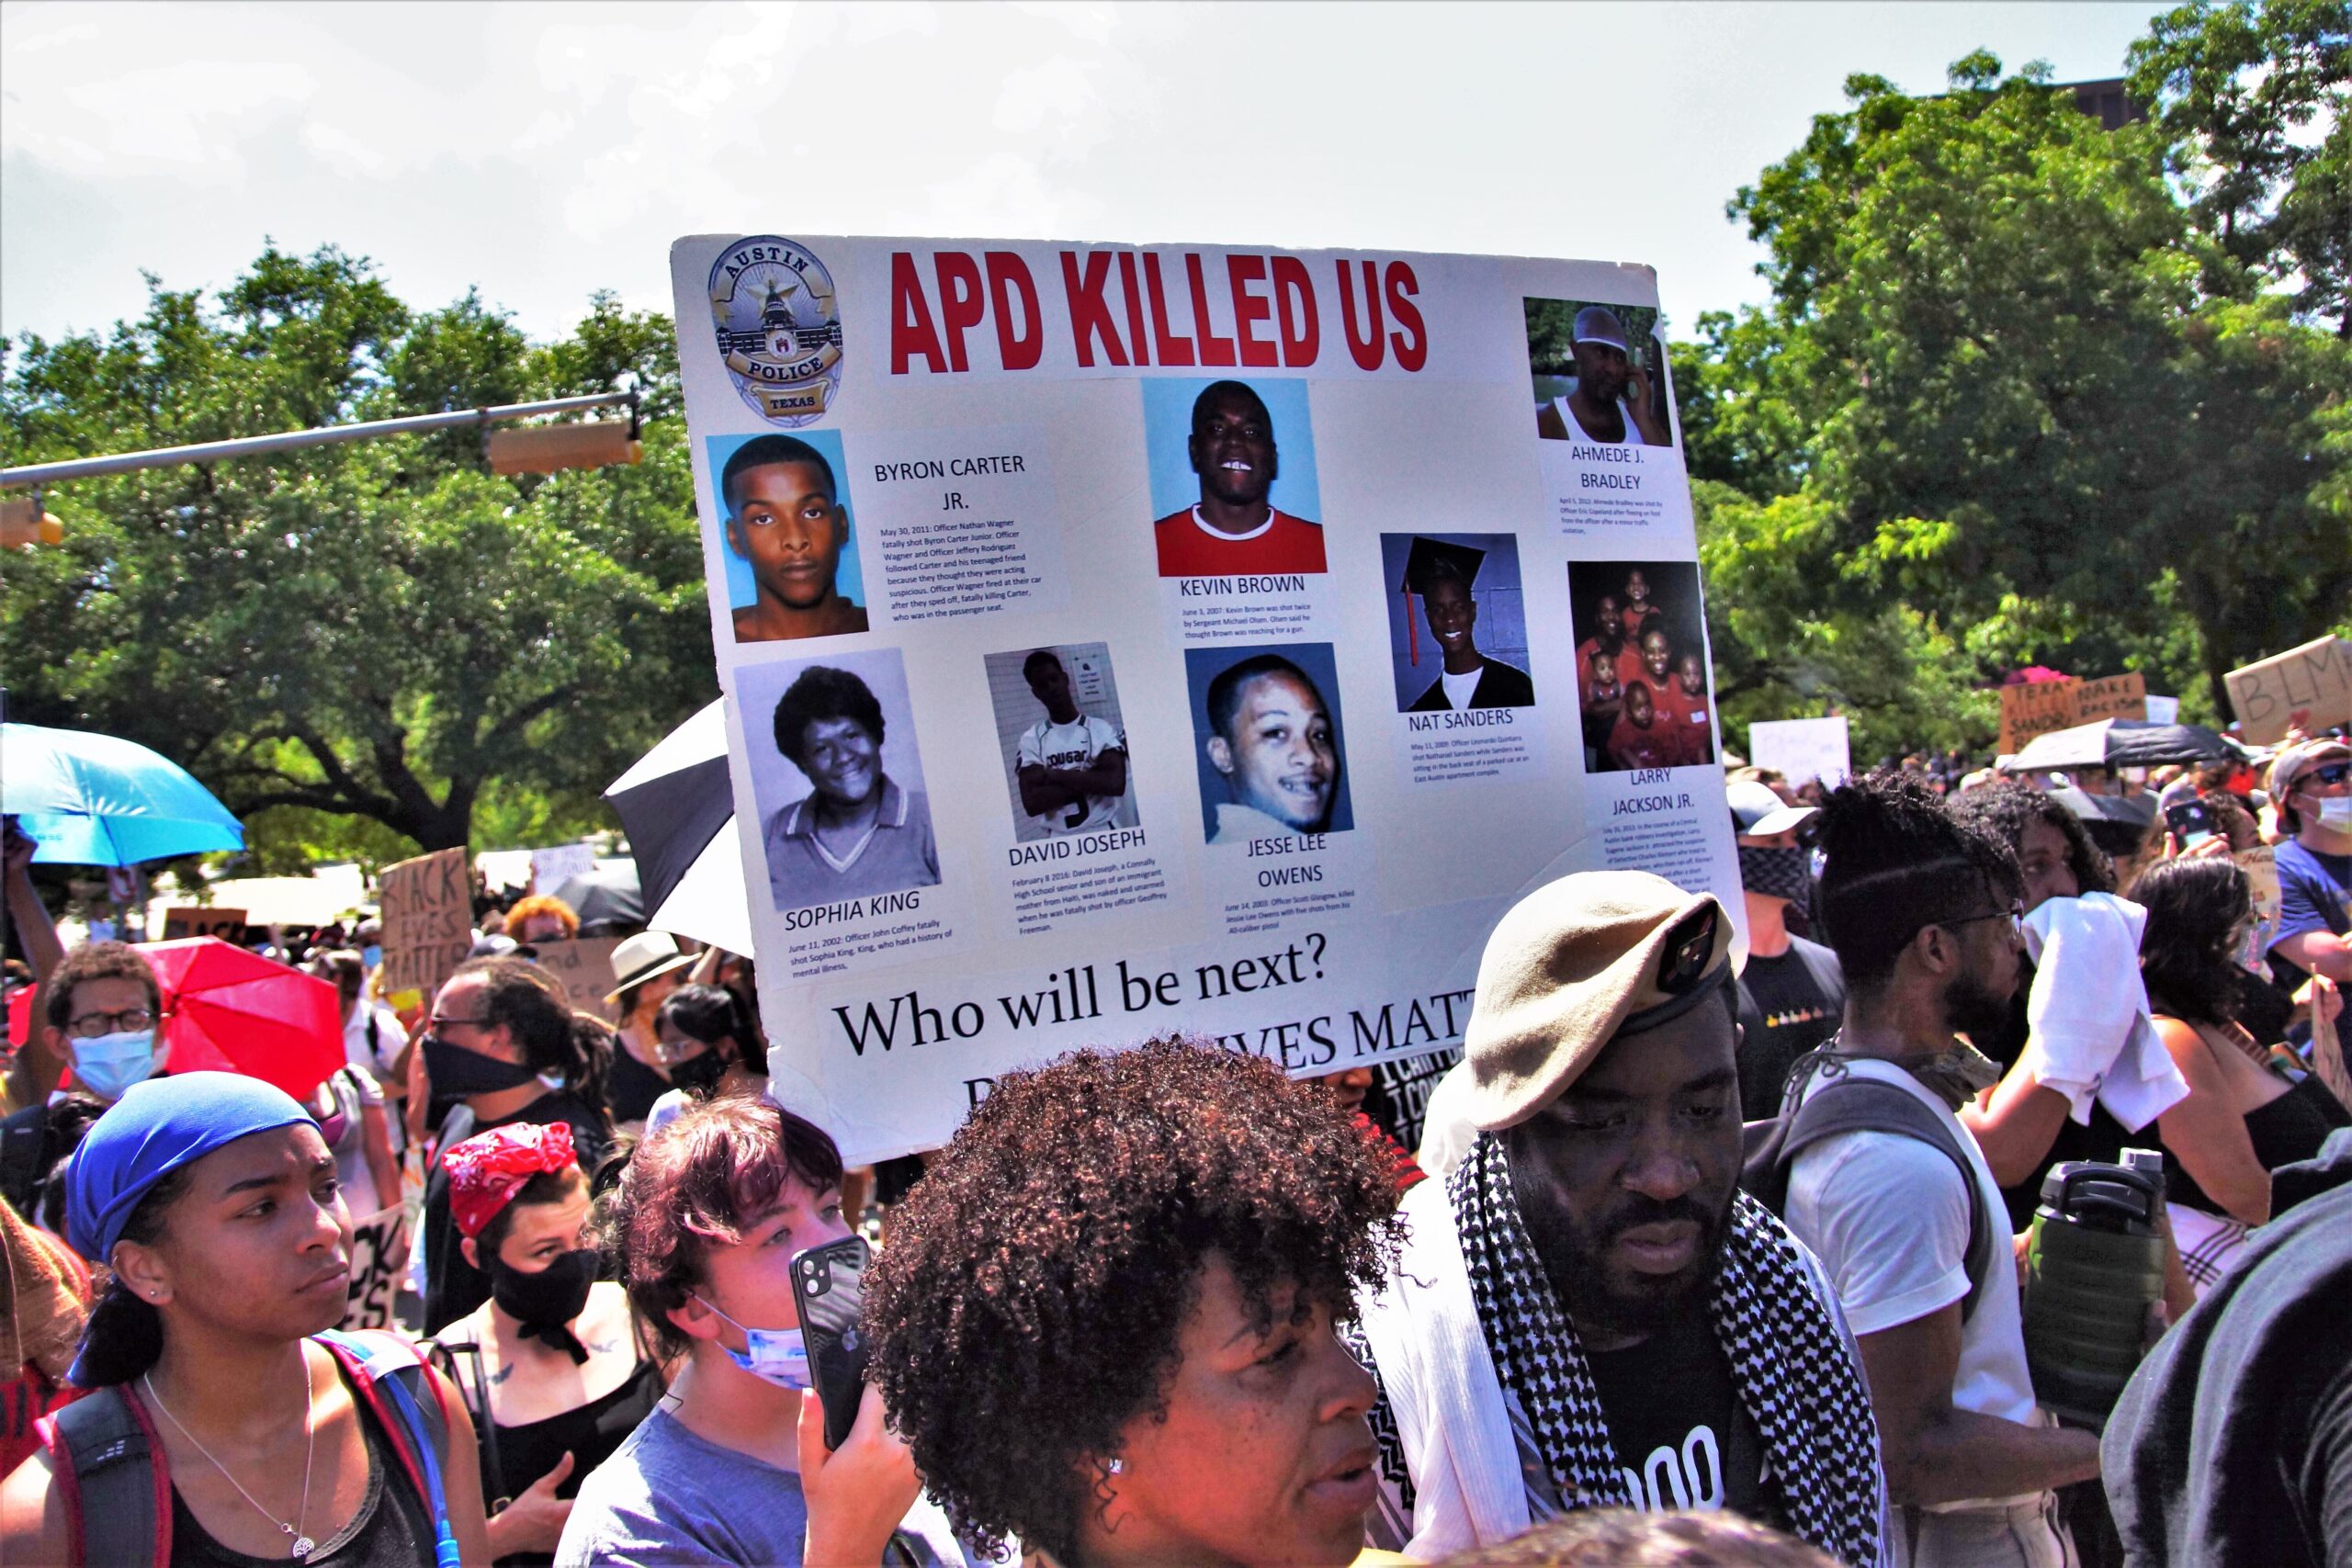 Scene of a protest focused on a sign that reads "APD Killed Us" along with images of victims of police violence